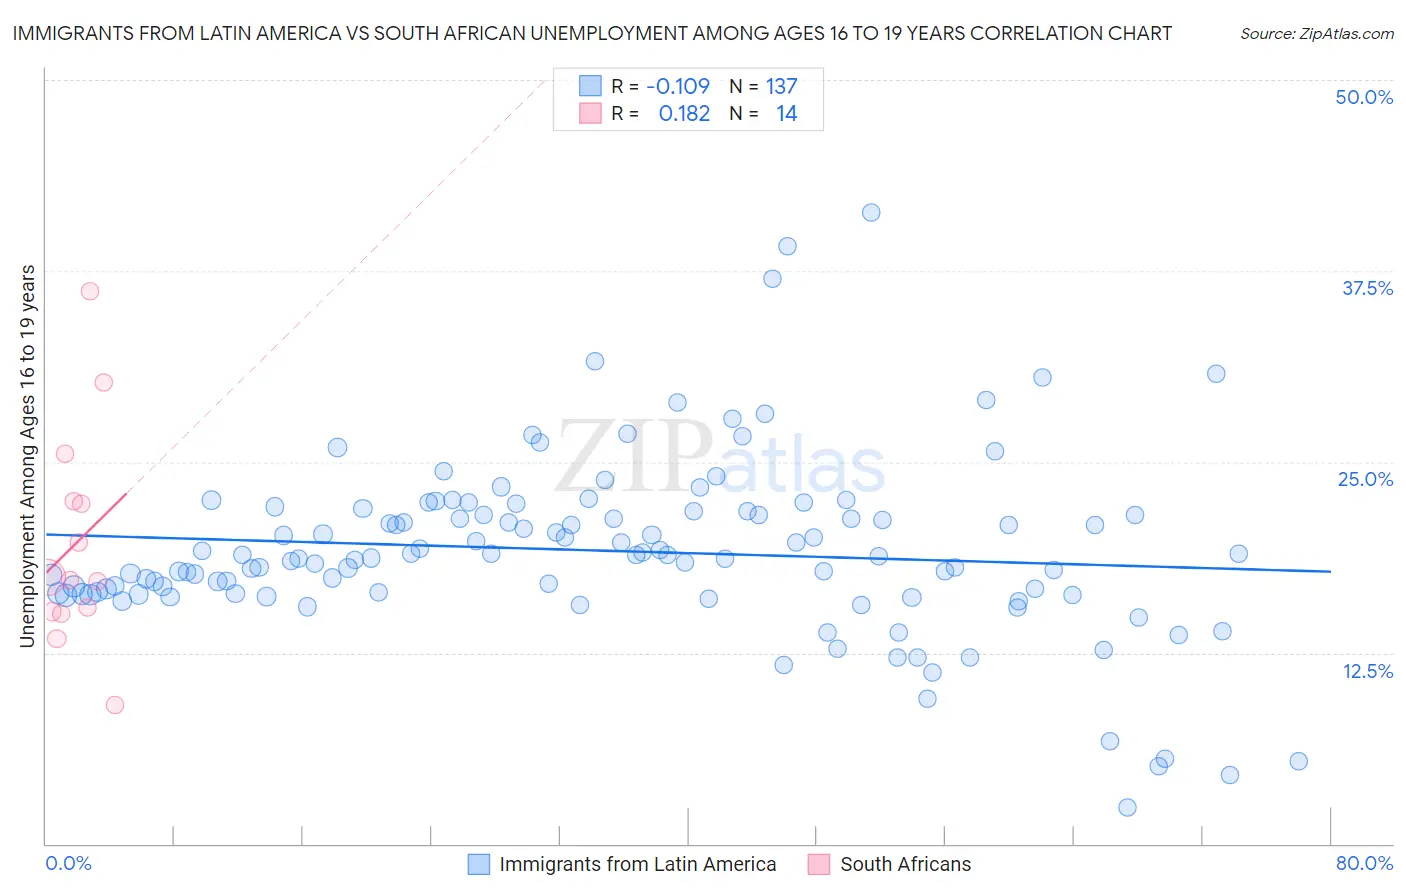 Immigrants from Latin America vs South African Unemployment Among Ages 16 to 19 years